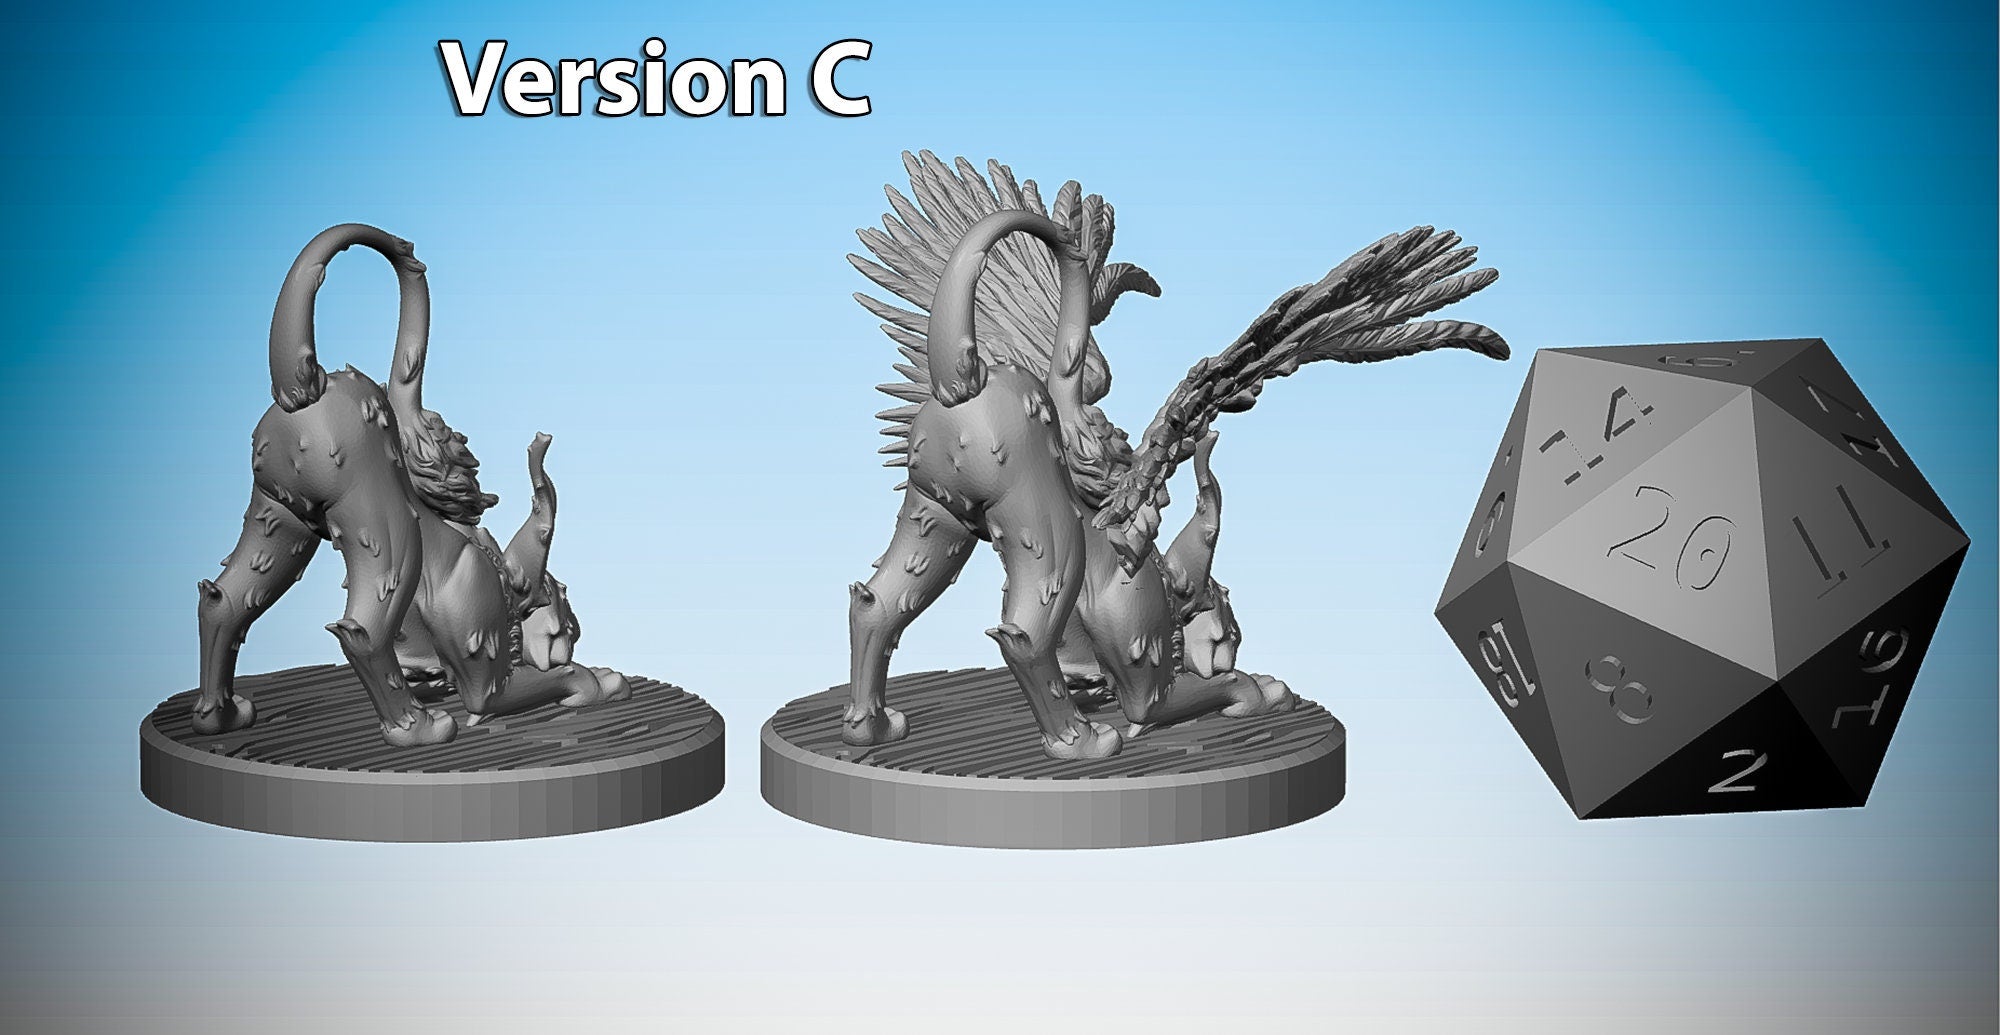 CAT FAMILIAR "Kneazle" (4 versions)-Role Playing Miniatures